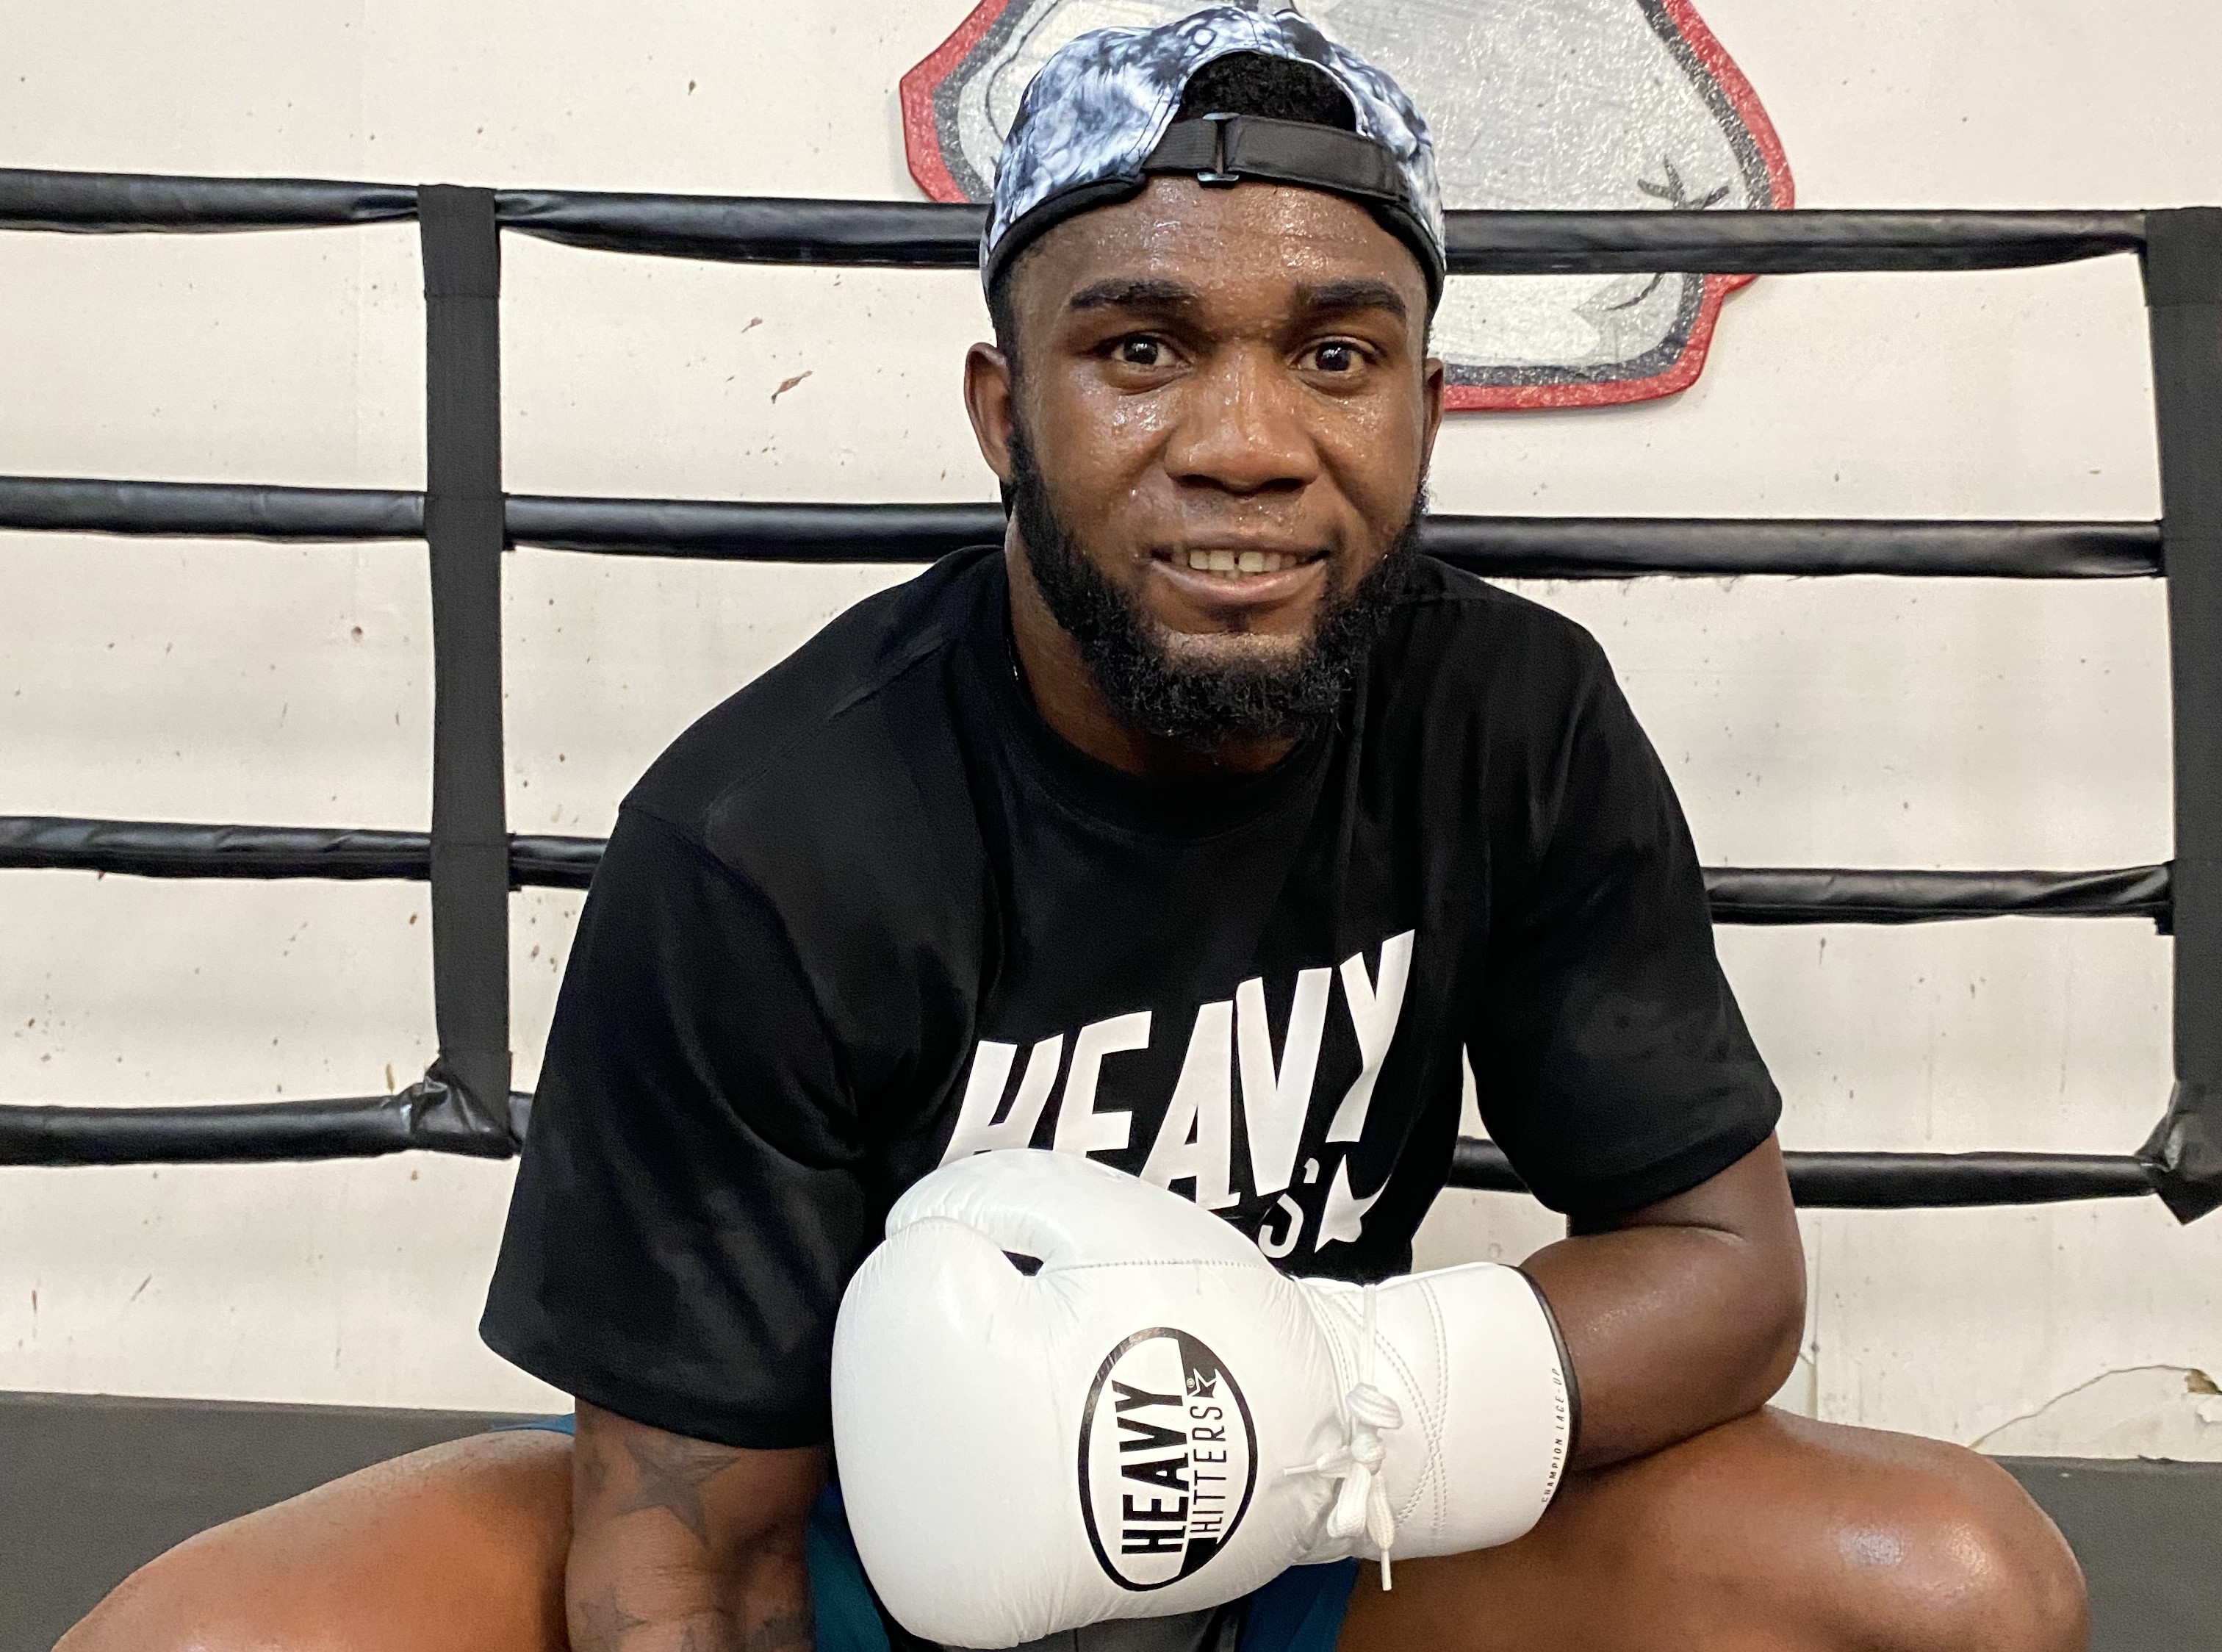 Carlos Adames: "My time will come where I will show that I’m the best middleweight in the world!”